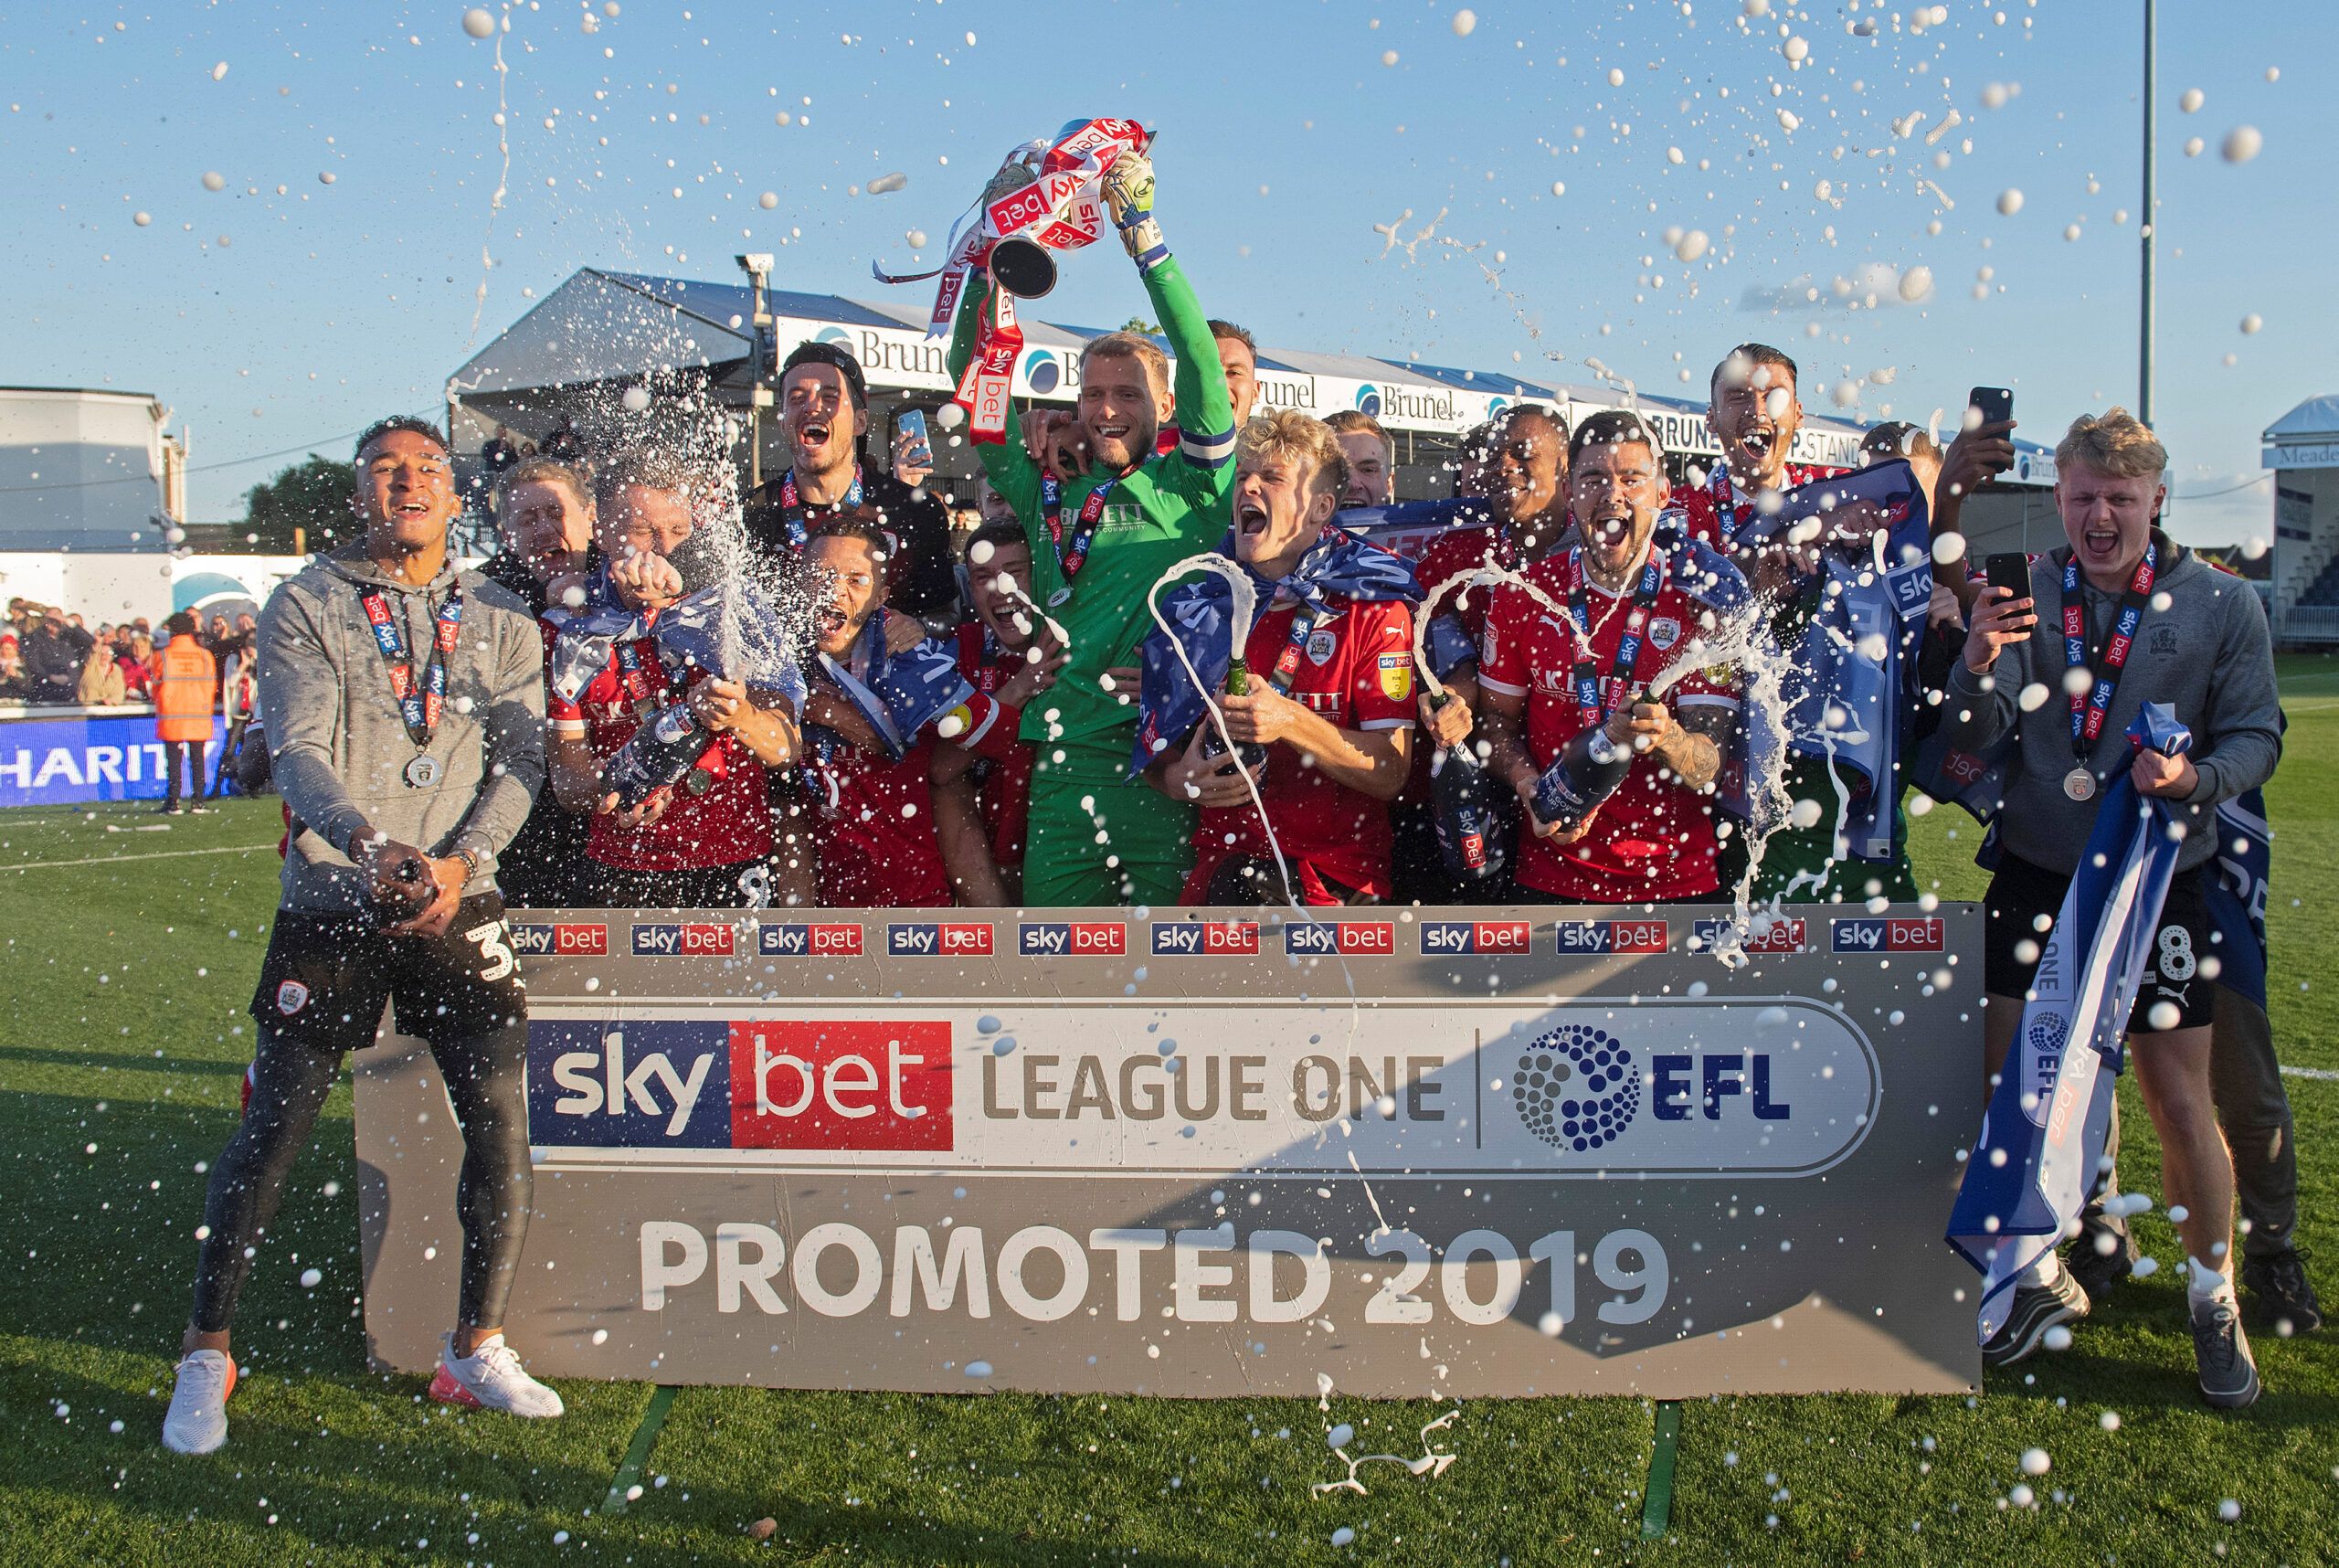 Soccer Football - League One - Bristol Rovers v Barnsley - Memorial Stadium, Bristol, Britain - May 4, 2019   Barnsley players celebrate their promotion with the trophy and spraying sparkling wine after the match    Action Images/Alan Walter    EDITORIAL USE ONLY. No use with unauthorized audio, video, data, fixture lists, club/league logos or 